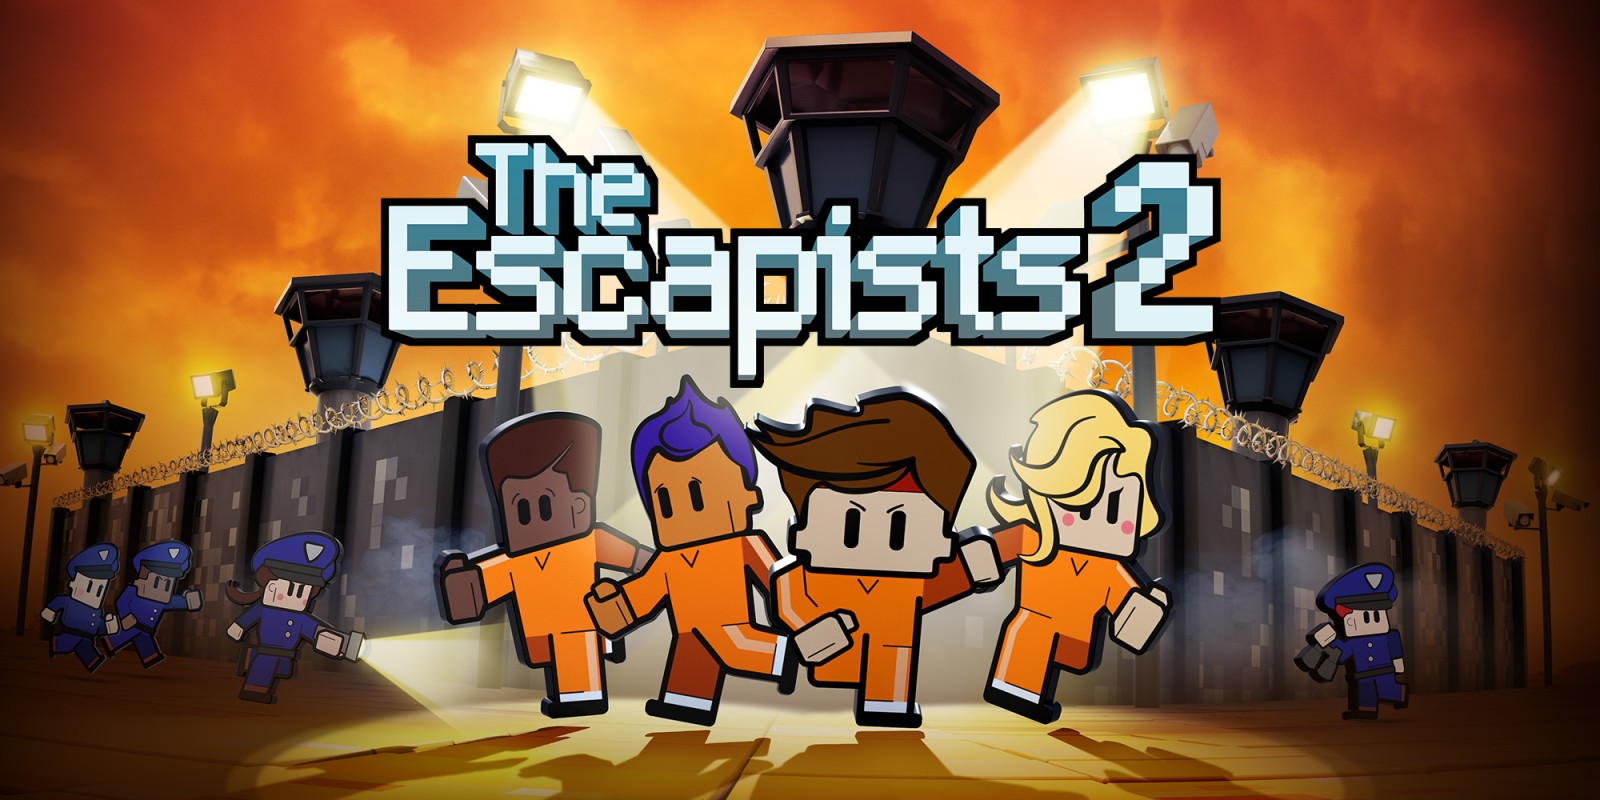 H2x1_NSwitchDS_TheEscapists2_image1600w.jpg